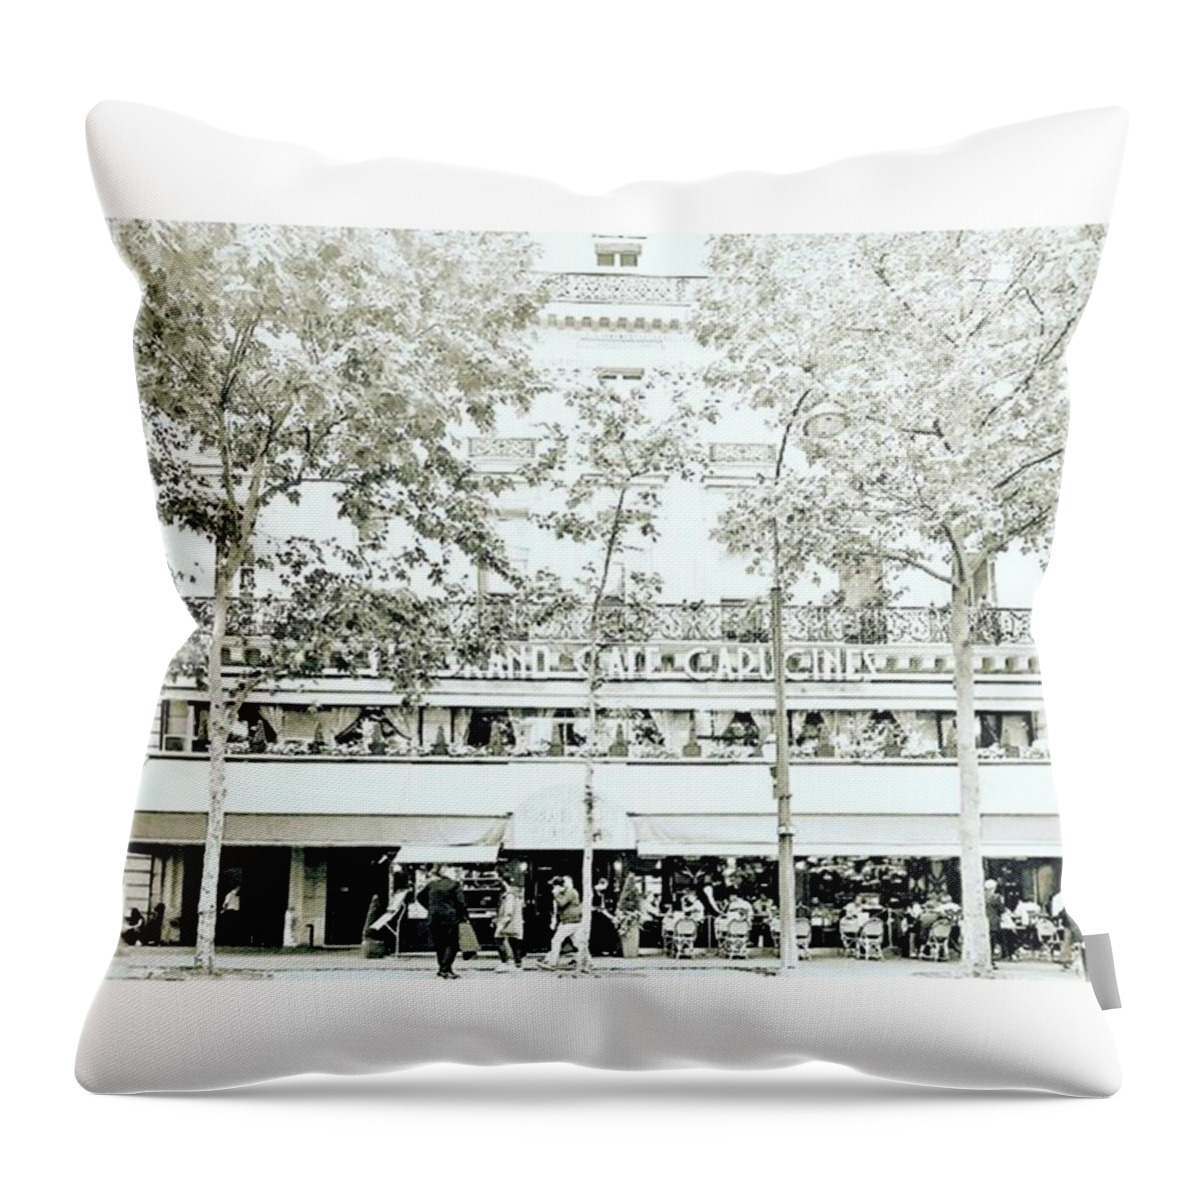 Le Grand Cafe Capucines Paris Throw Pillow featuring the photograph Le Grand Cafe Capucines - Paris, France by Loly Lucious